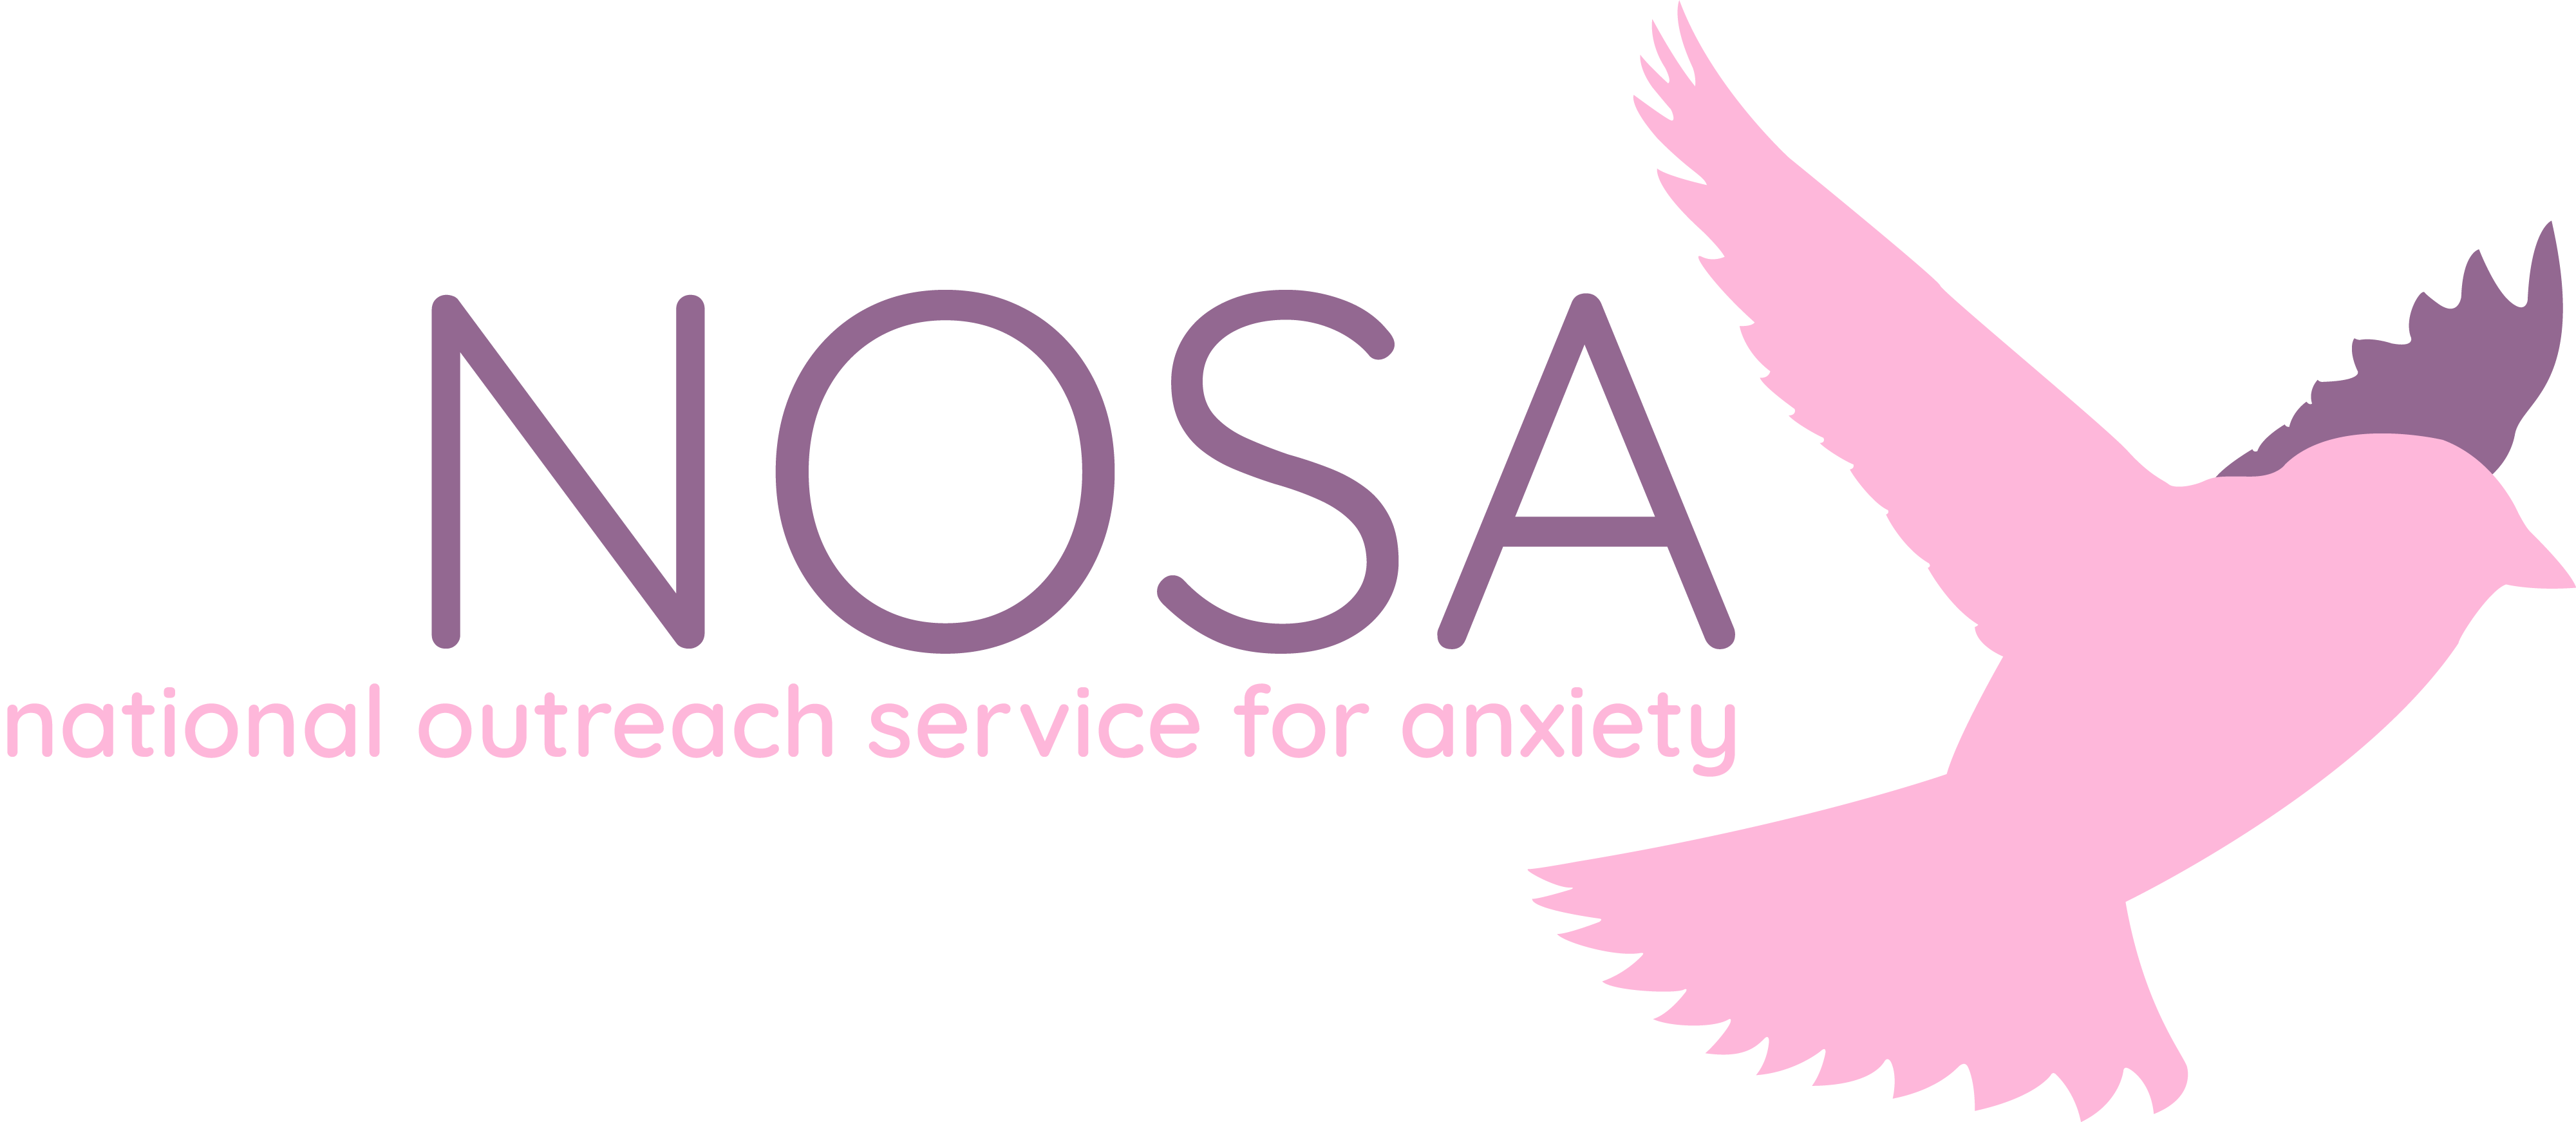 7 Ways to Deal With Anxiety - NOSA - National Outreach Service for Anxiety